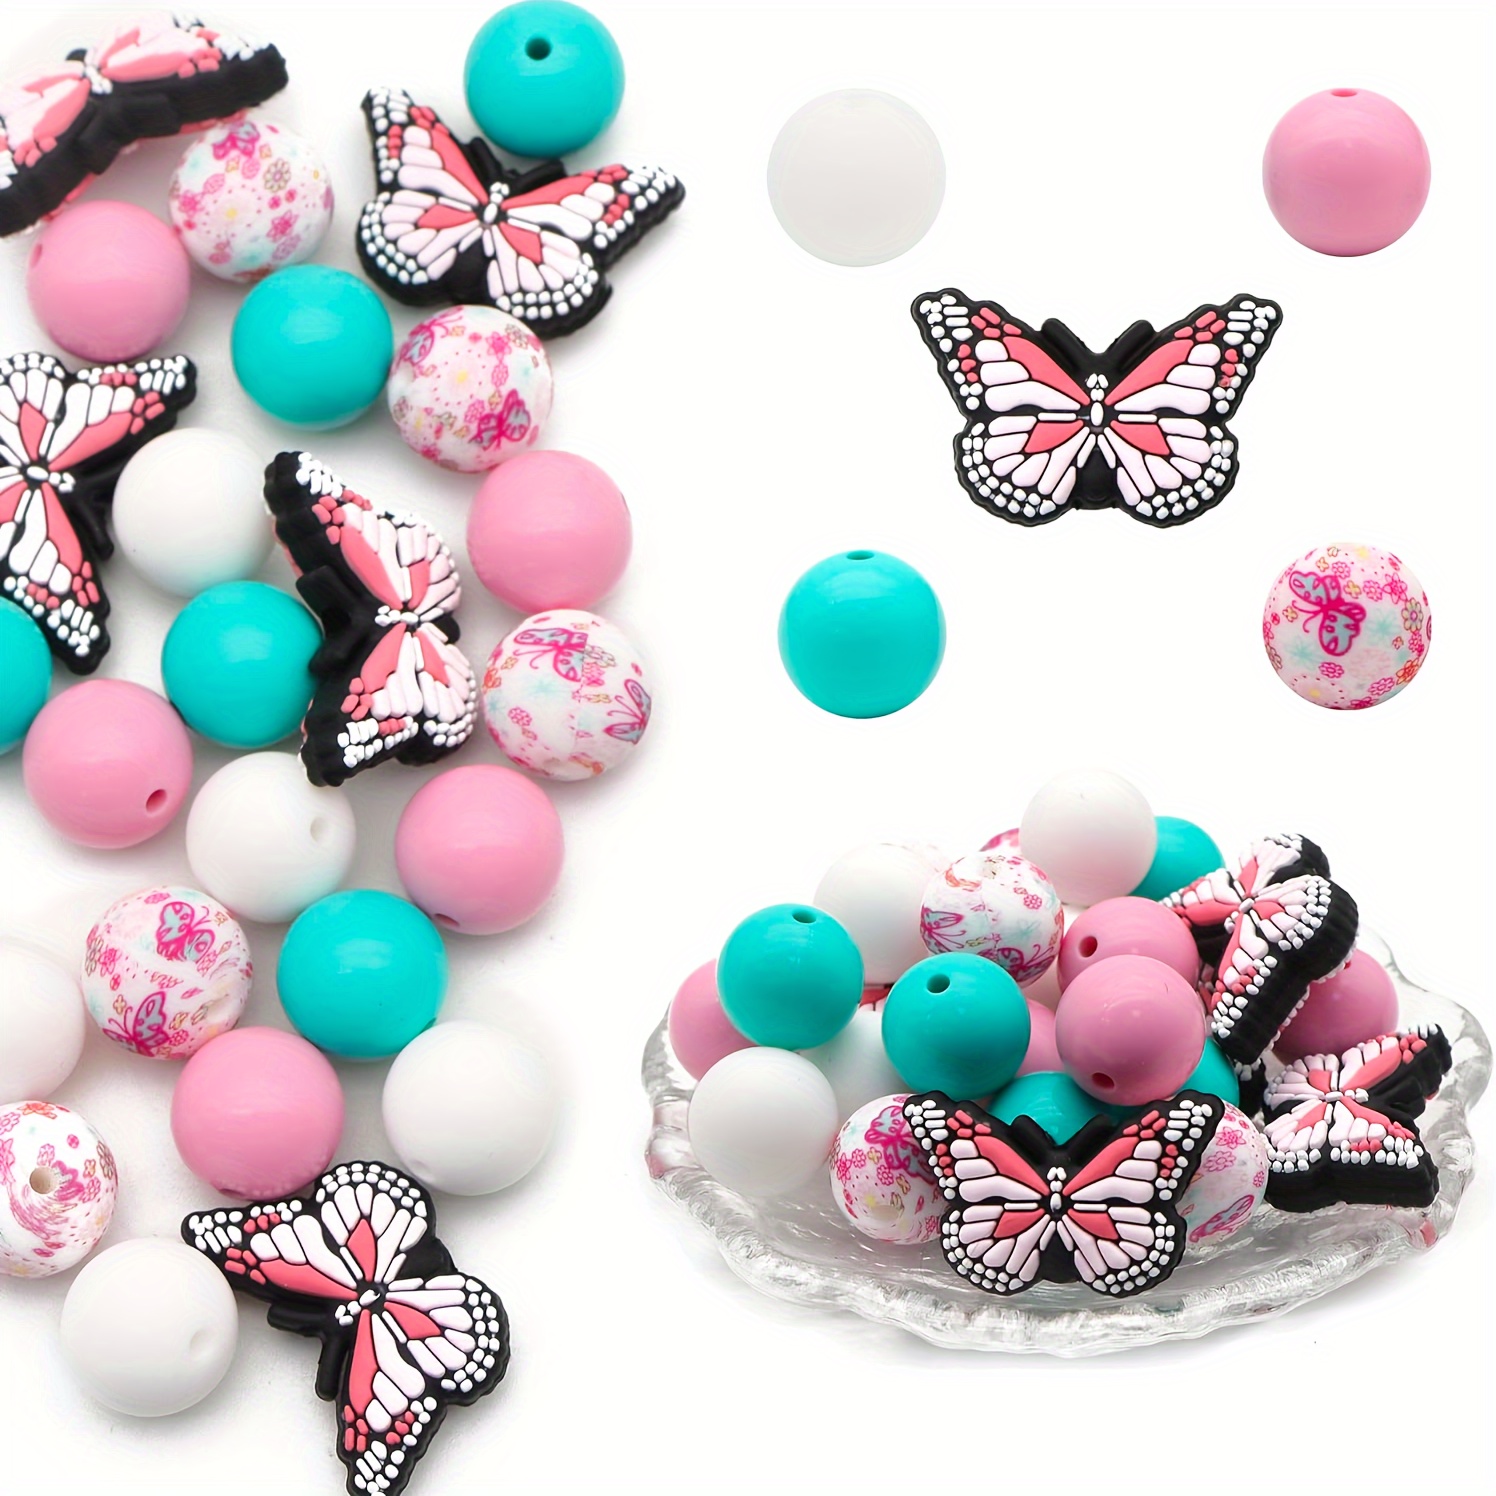 

40pcs 15mm Silicone Solid Colorful With Butterfly Shape Beads For Jewelry Making Diy Creative Key Bag Chain Pens Lanyards Bracelet Necklace Craft Supplies